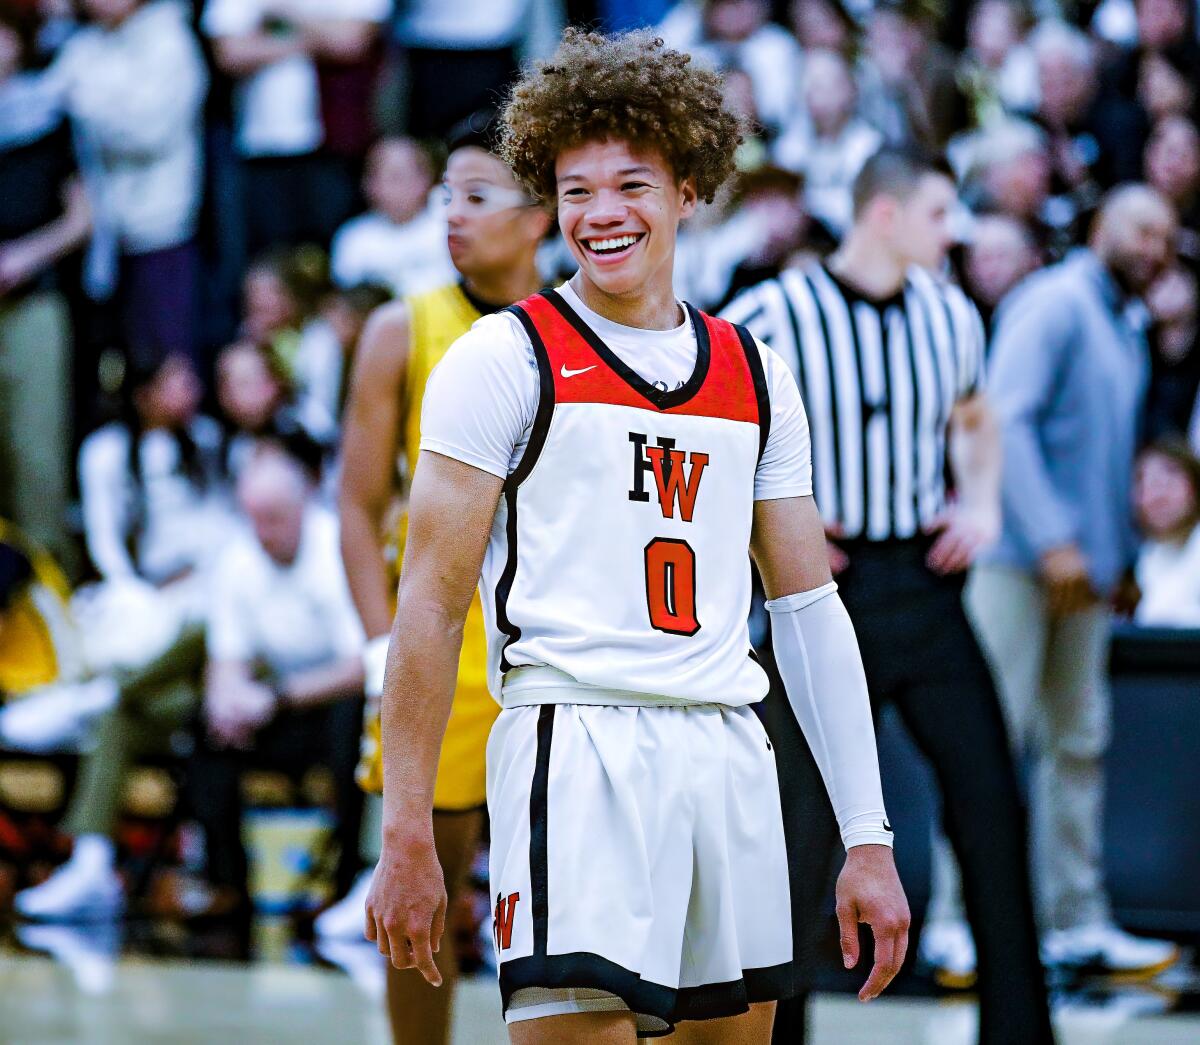 Harvard-Westlake star Trent Perry is all smiles during a recent game.